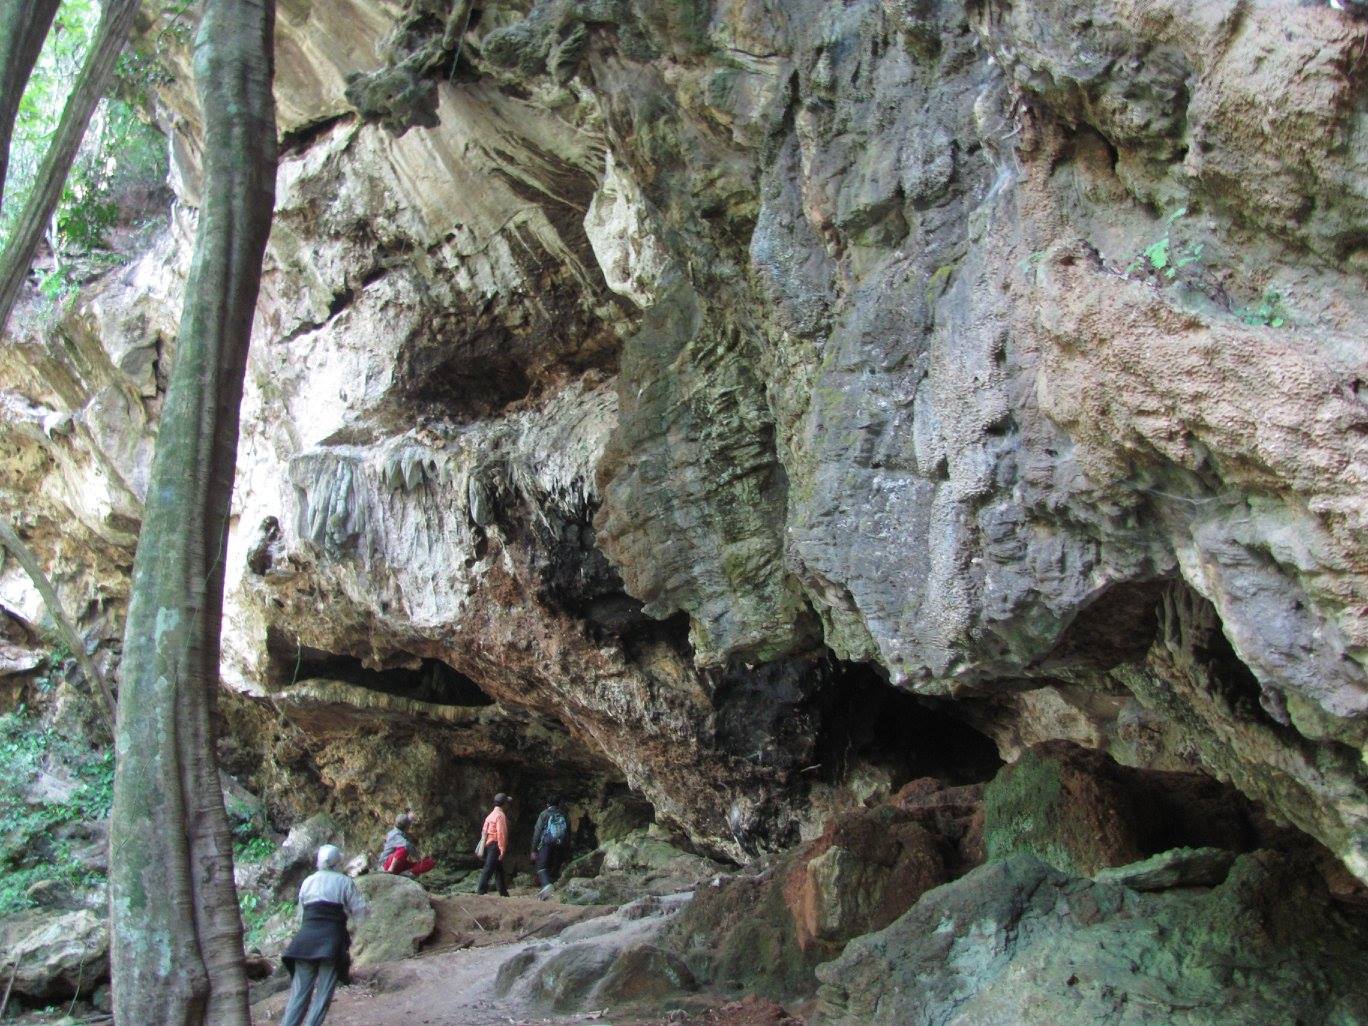 A massive rock structure with an opening at the base where people are walking. 